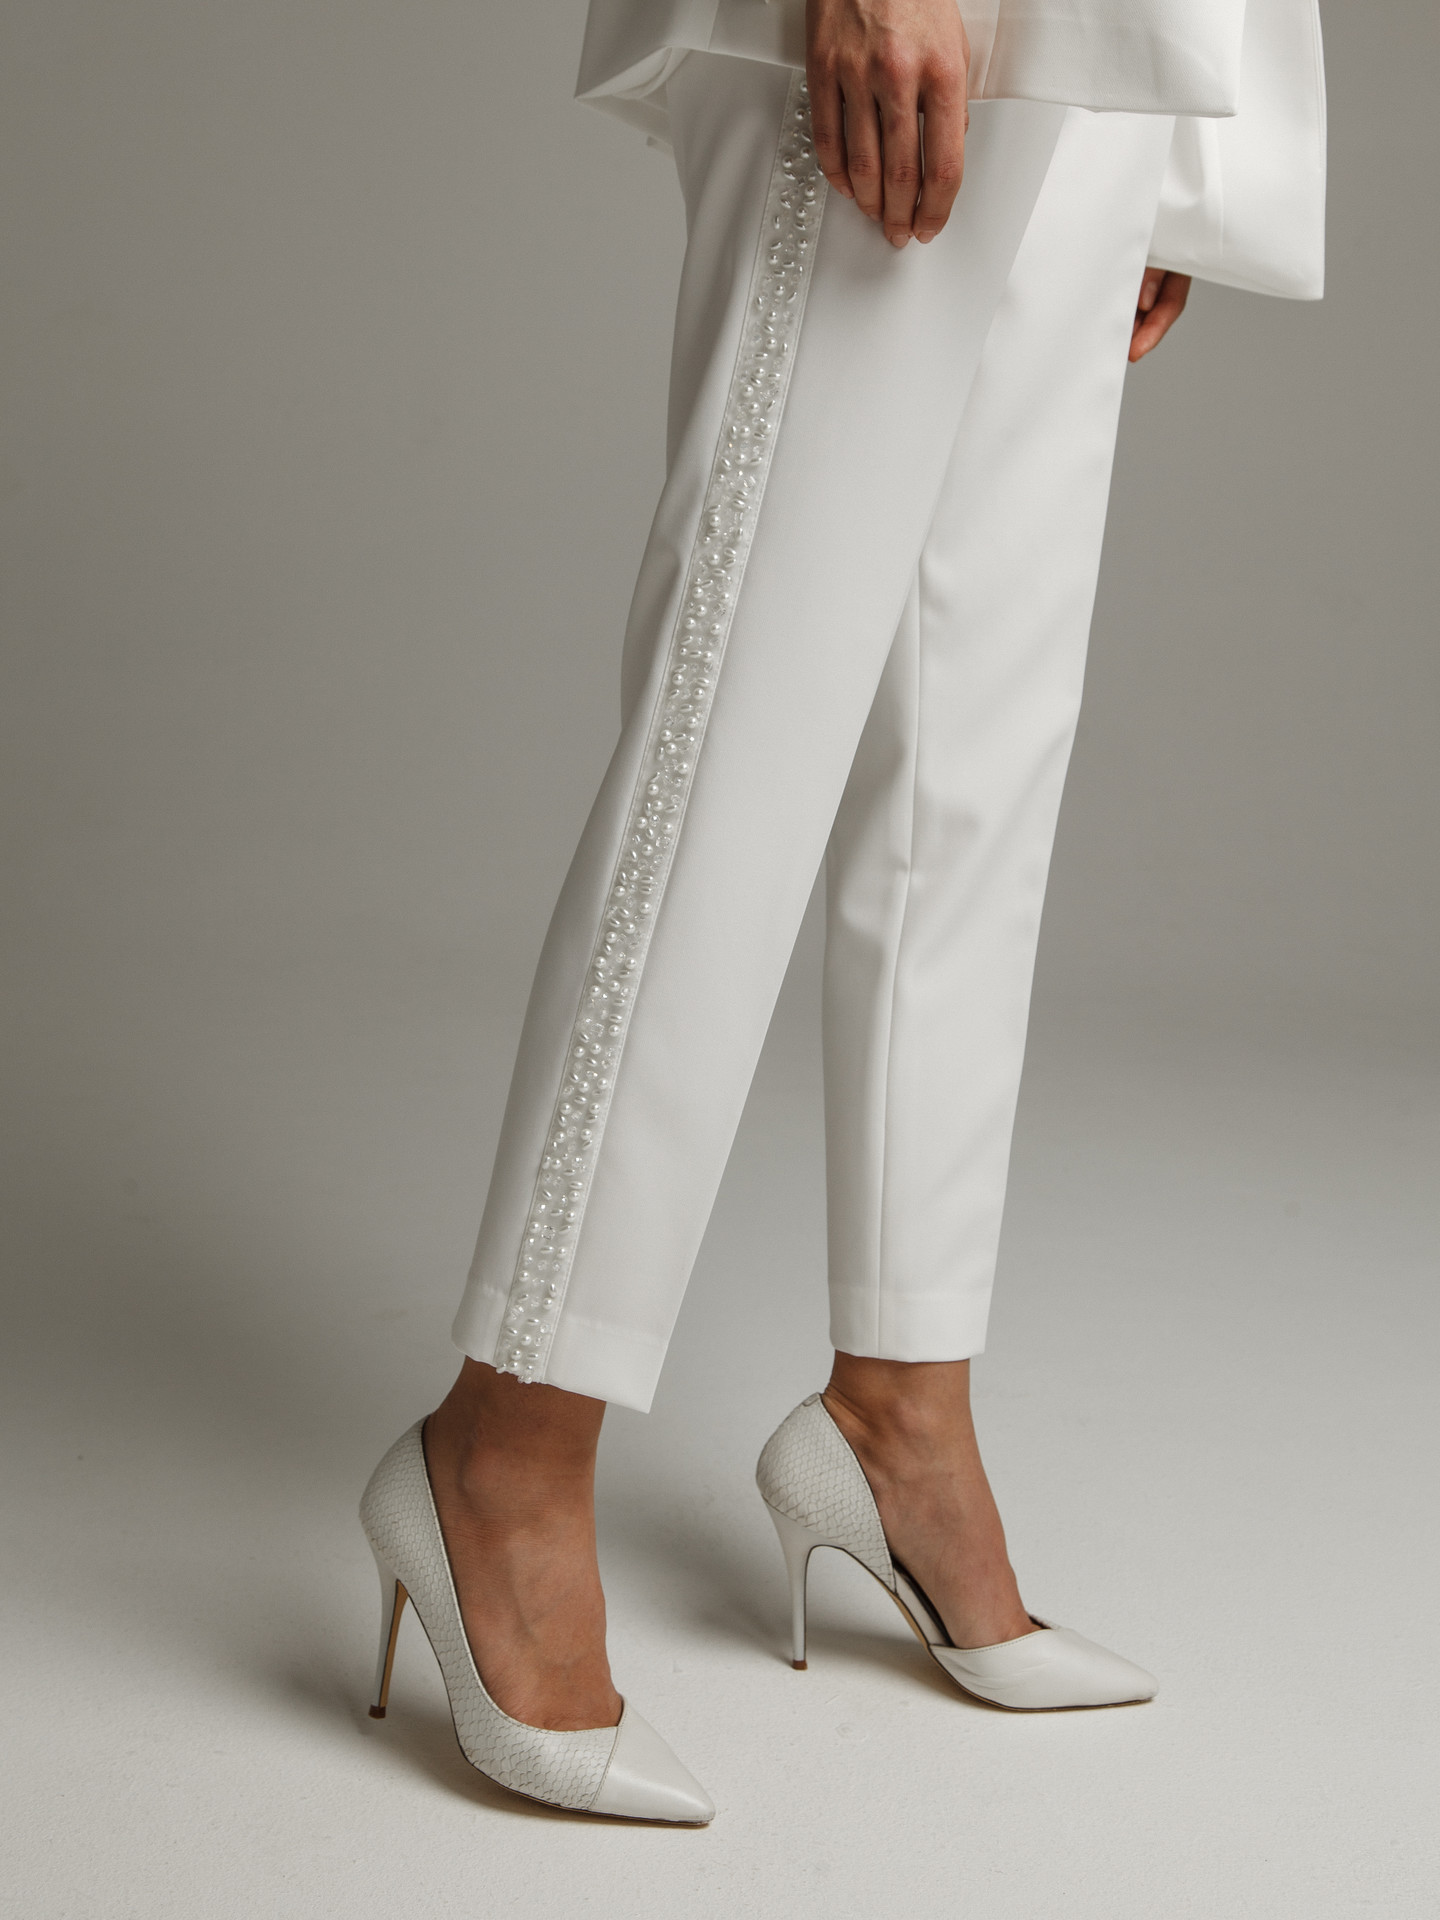 Beaded trousers, 2021, couture, trousers, bridal, off-white, beaded bridal suit, embroidery, popular